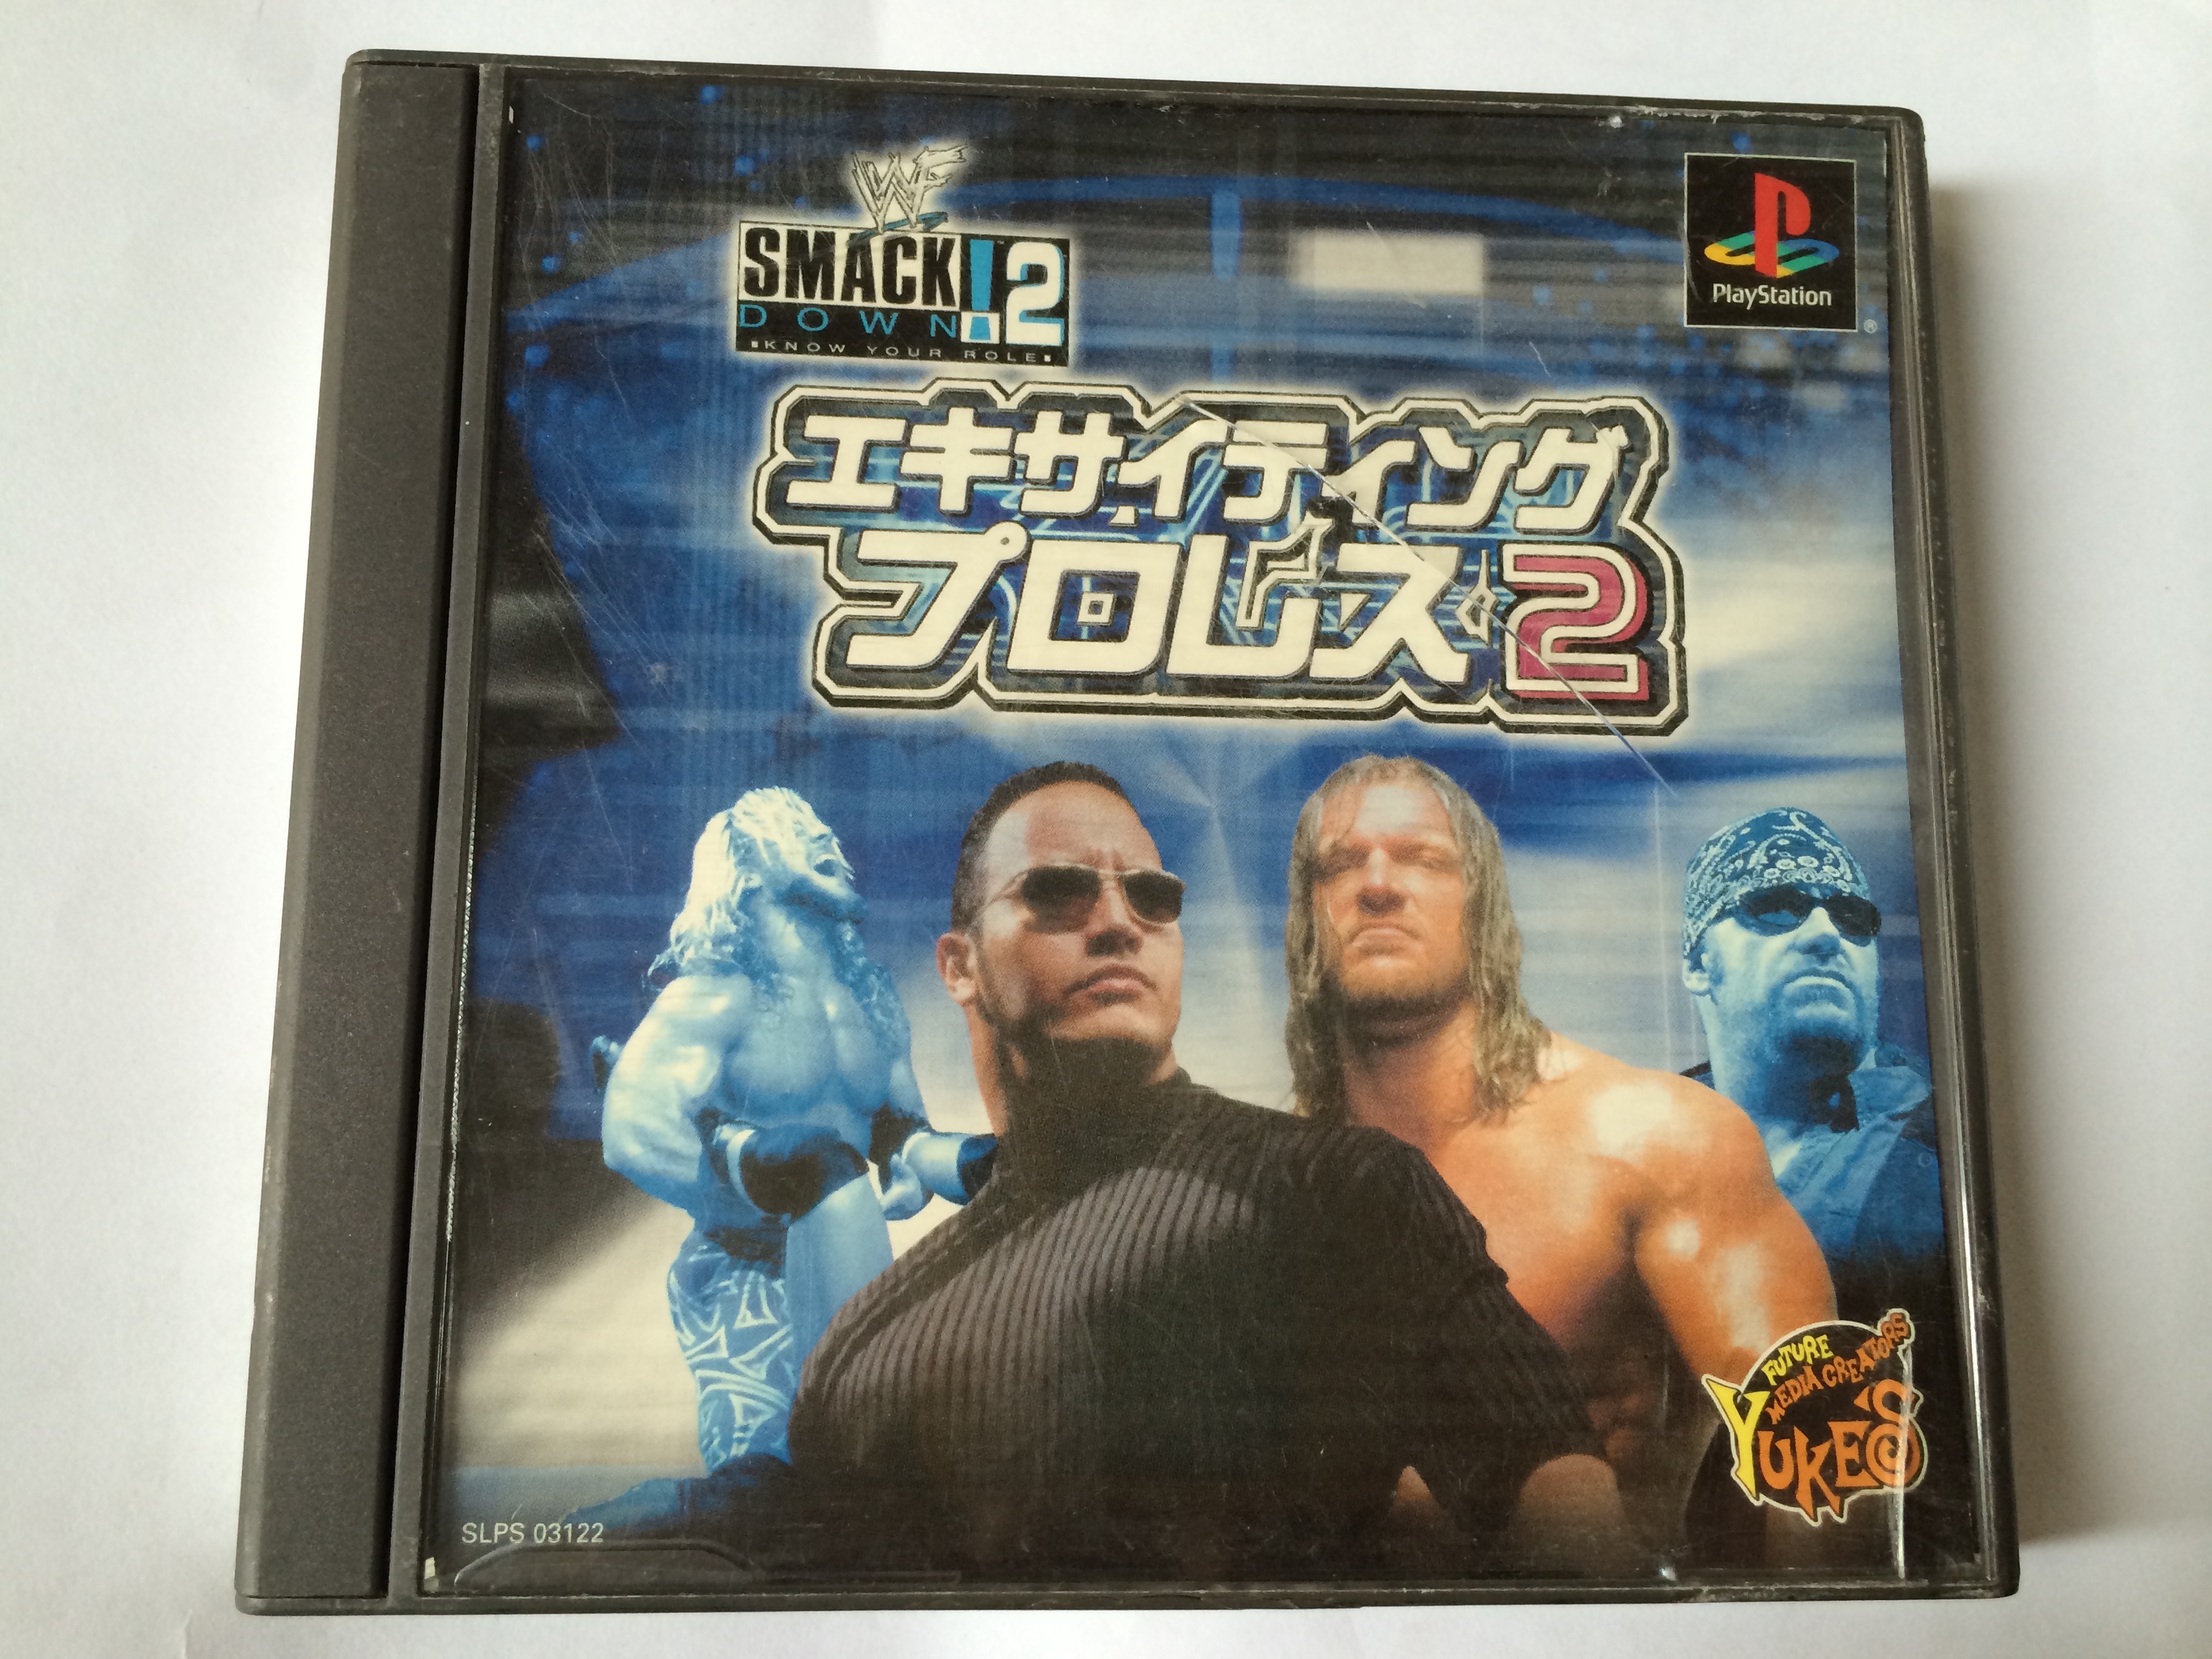 ps1 wwf smackdown2 know your role エキサイティングプロレス wwe